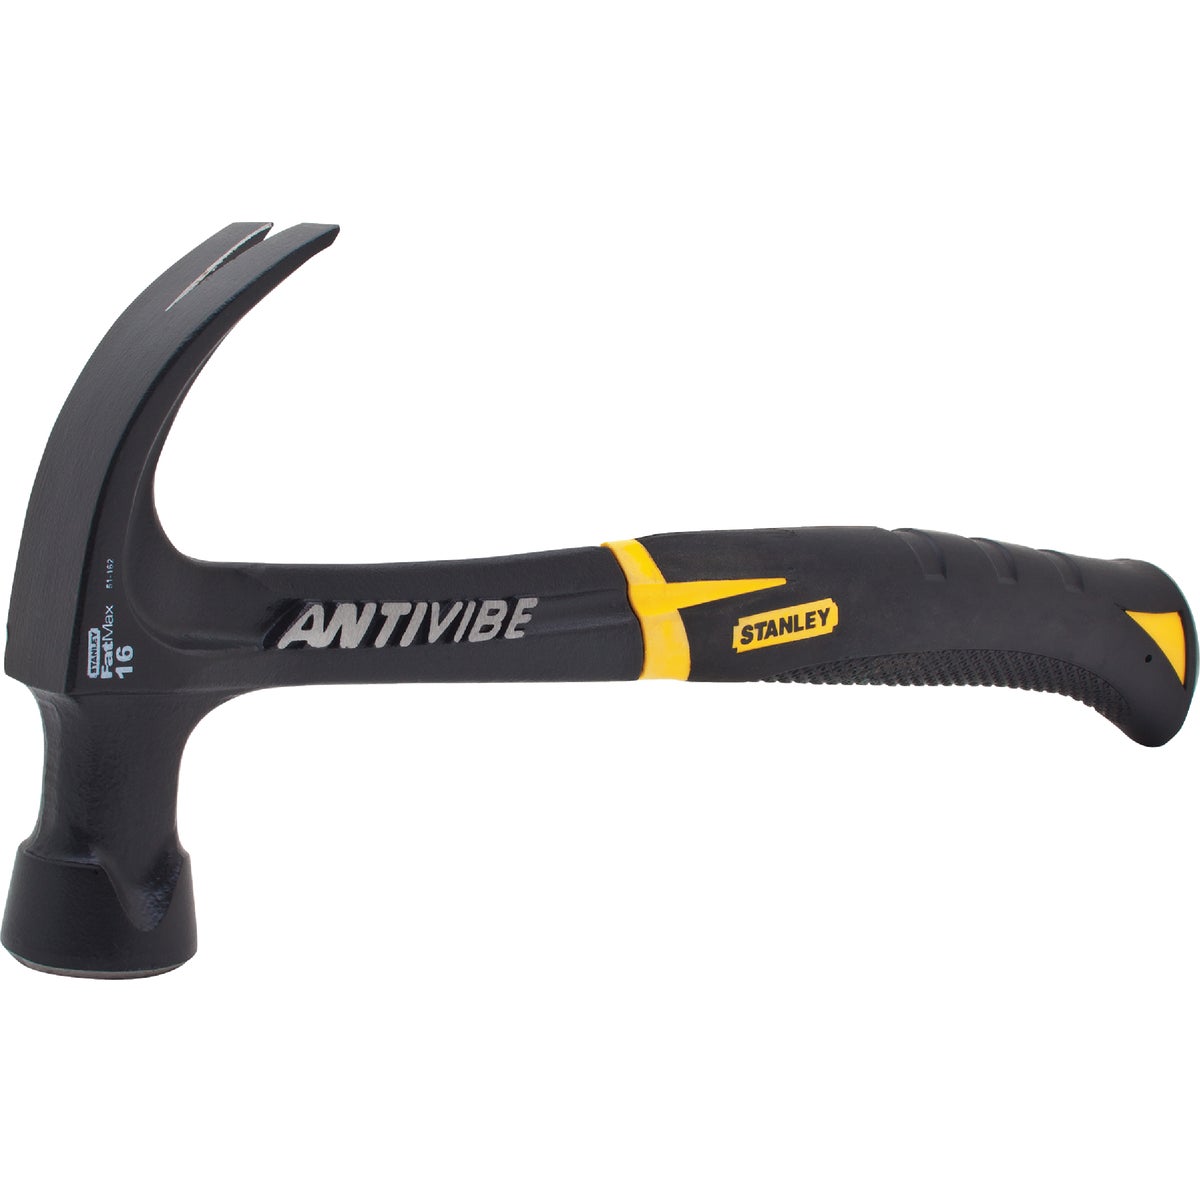 Stanley FatMax Anti-Vibe 16 Oz. Smooth-Face Curved Claw Hammer with Steel Handle